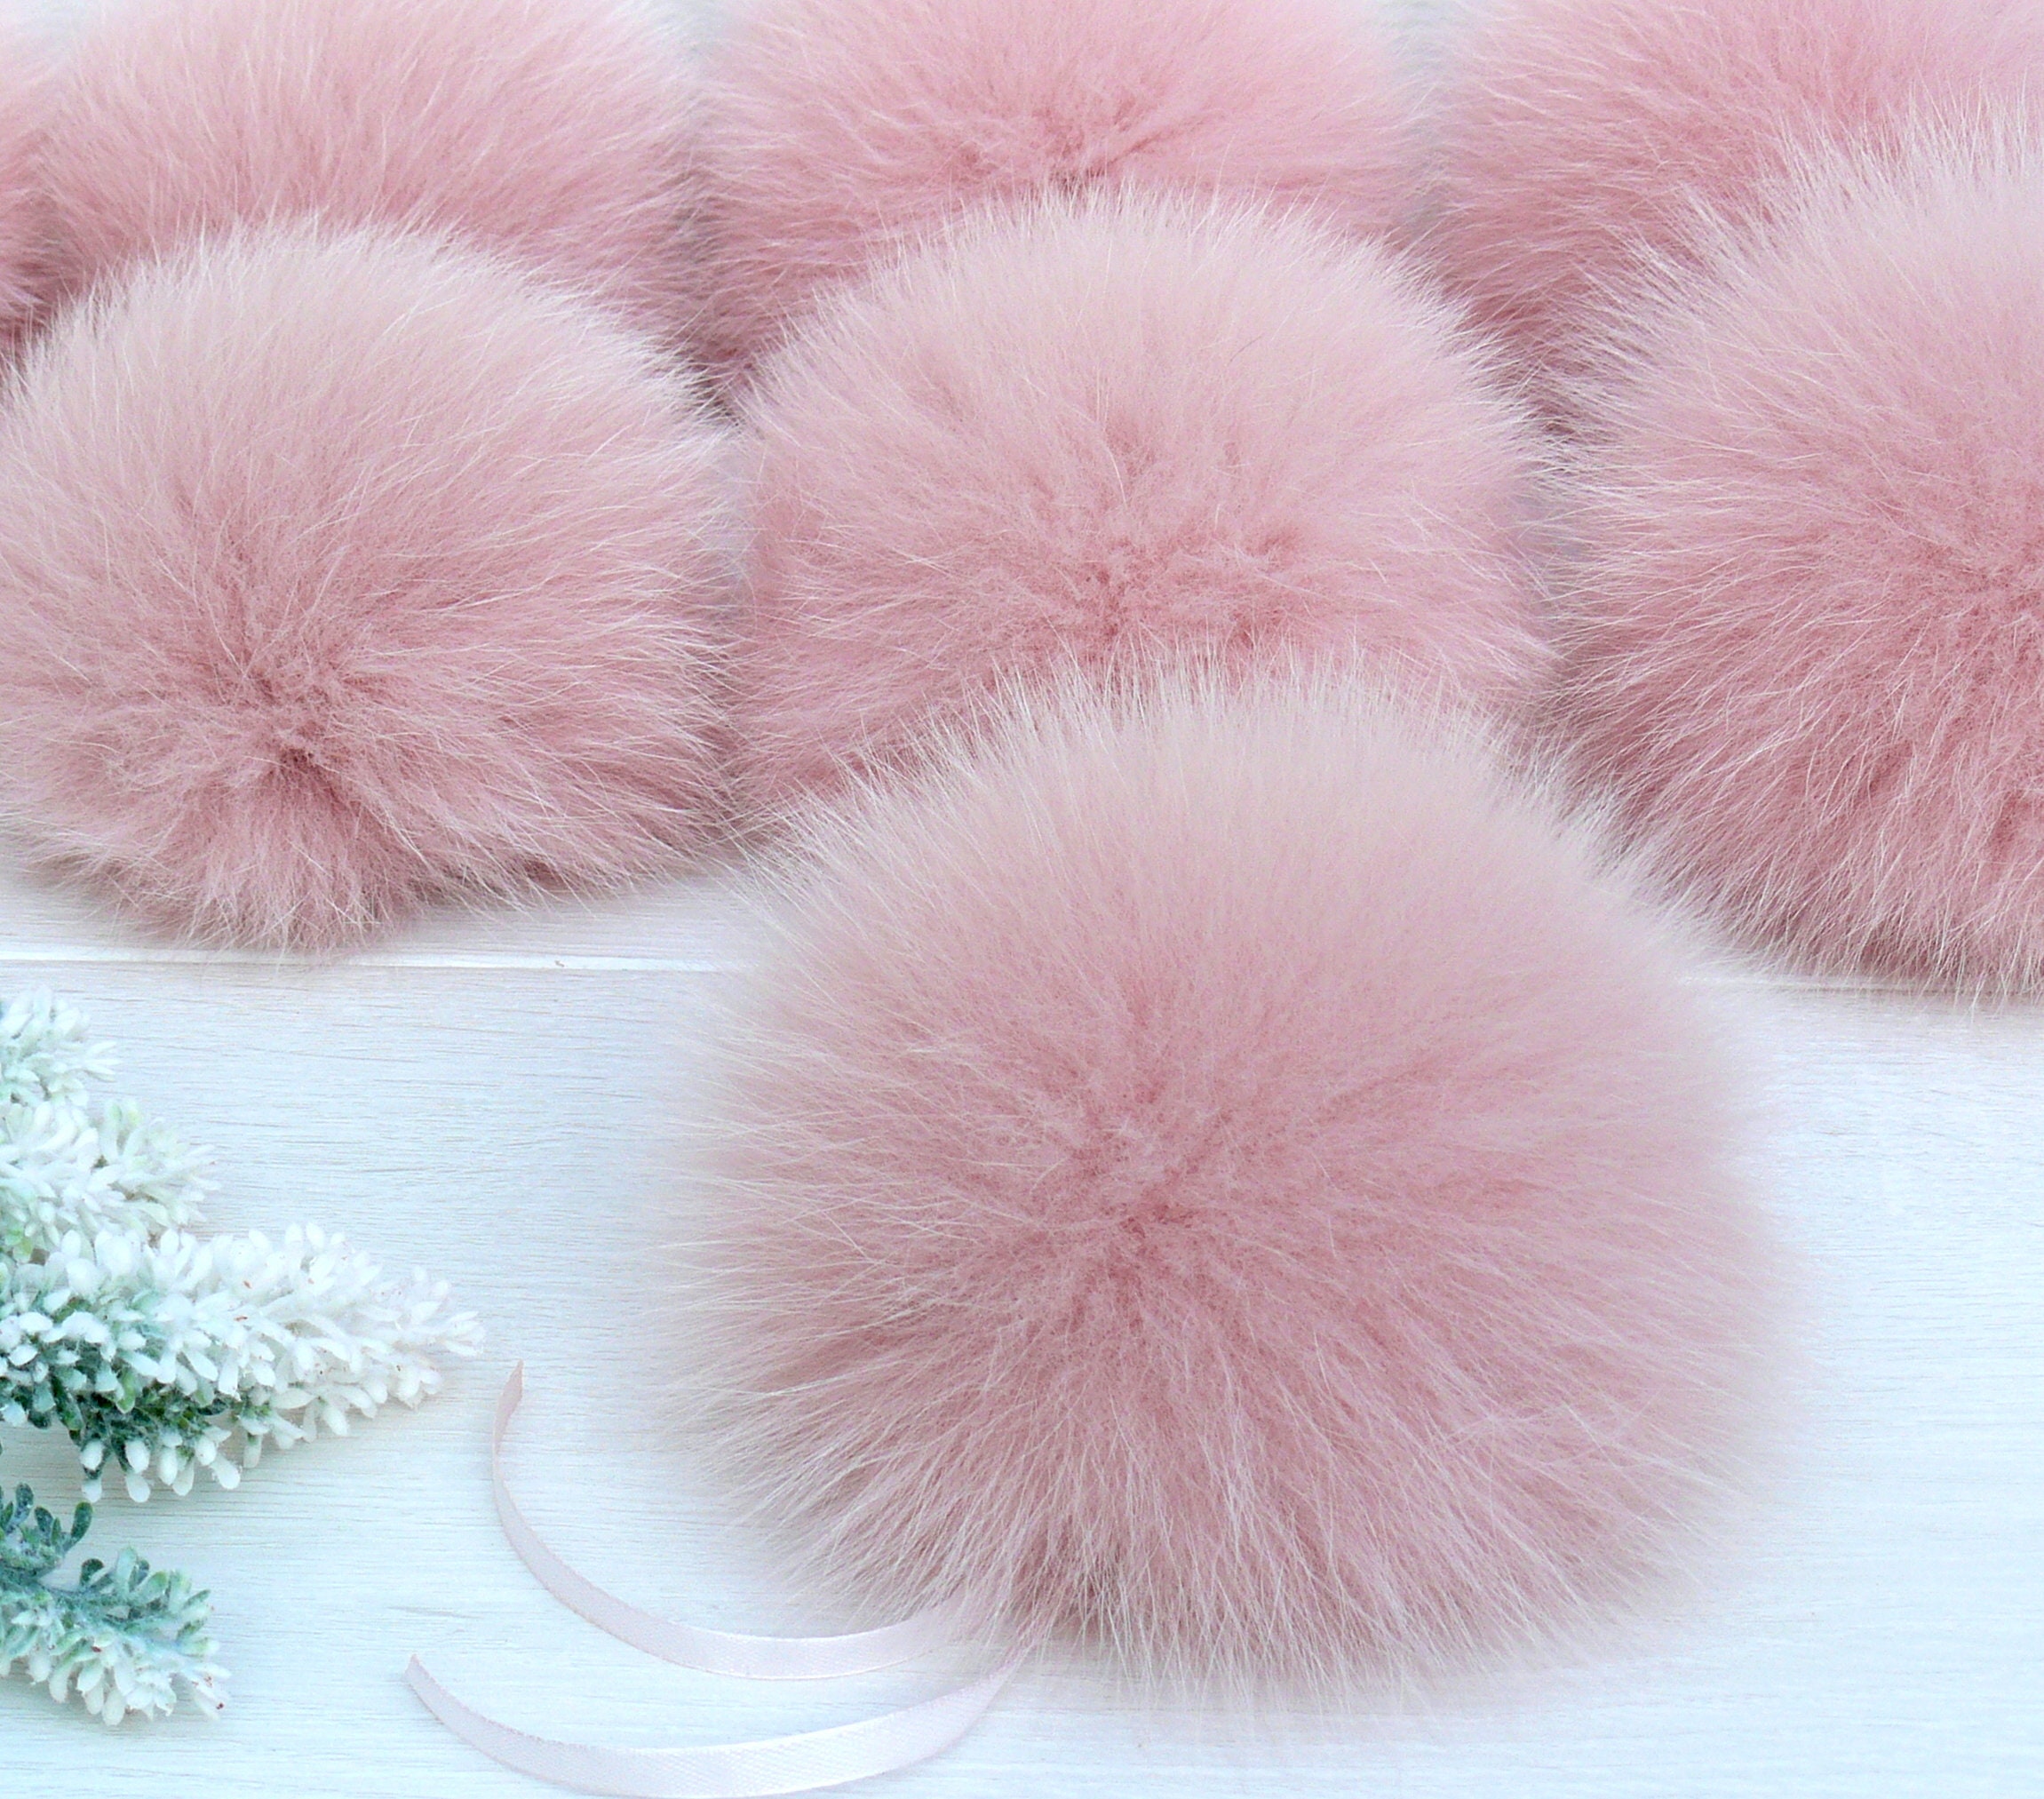 Luxury Multicolor Pink Cream Tan and Grey Pom Pom for Hat Large Pastel  Pompom With Long Pile Faux Fur Detachable Super Soft Fluffy Puff Ball 